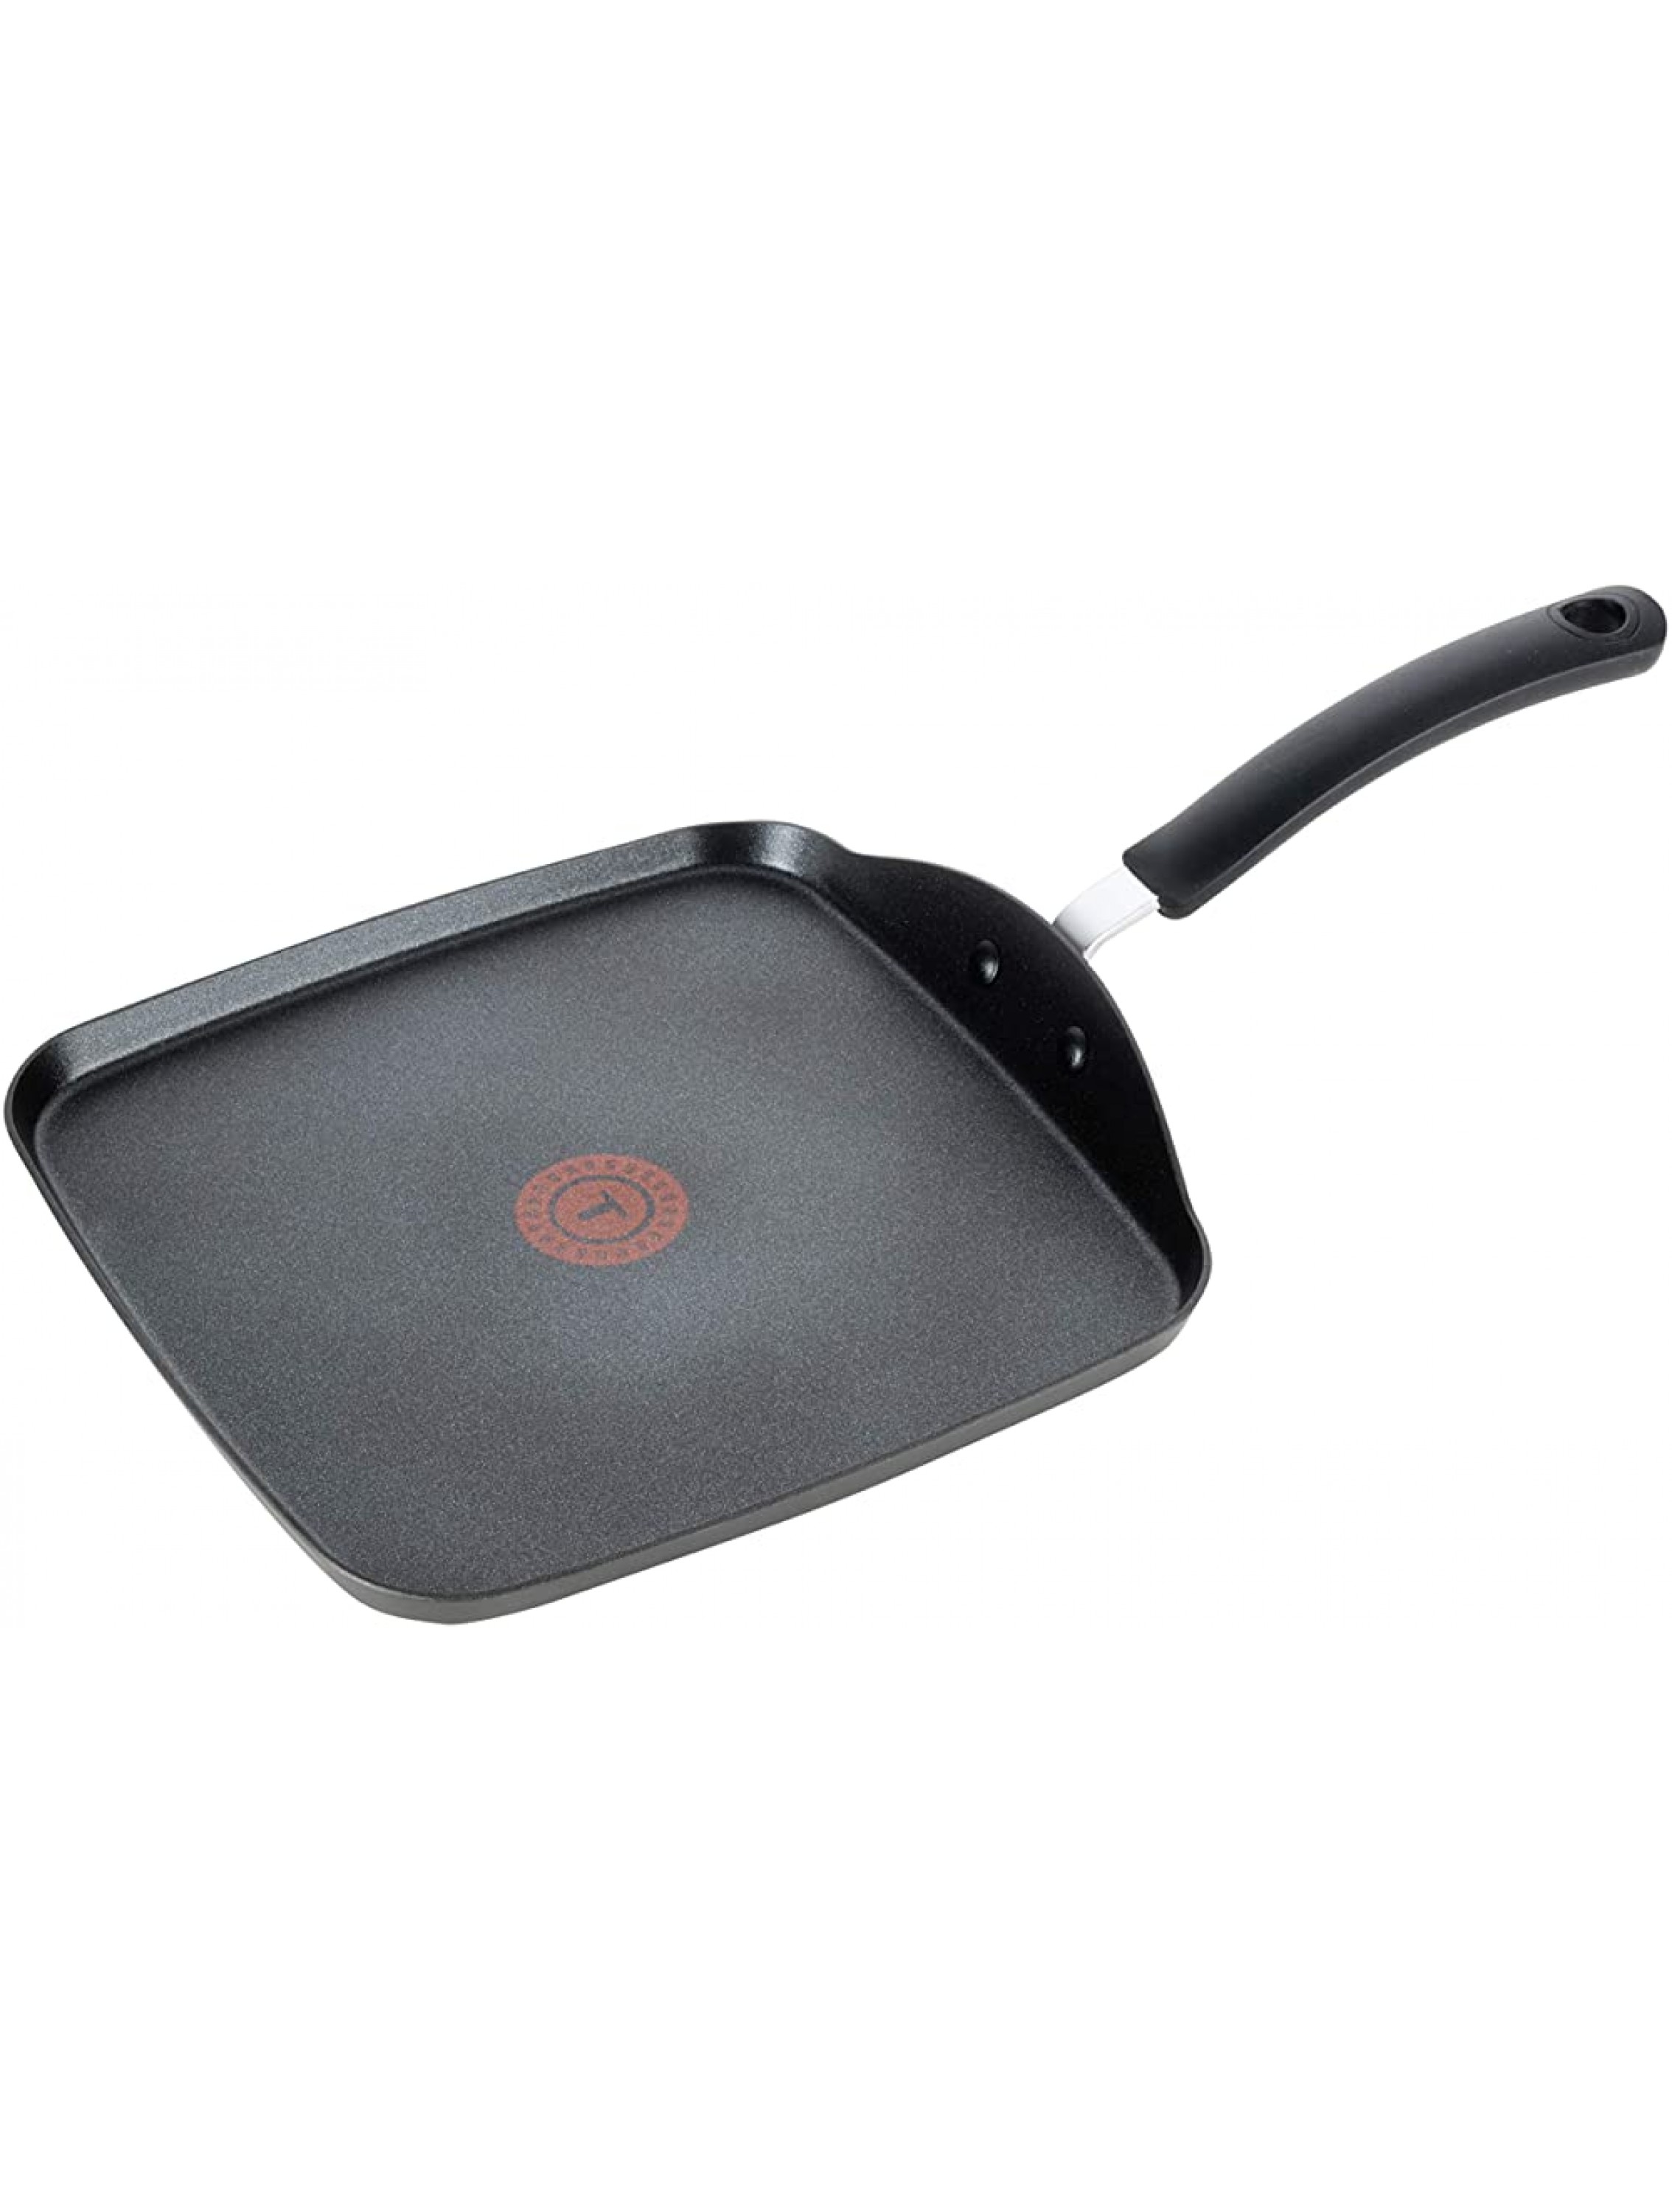 T-fal Ultimate Hard Anodized Nonstick 10.25 In. Square Griddle Black 10.25 Inch Grey - BFCDCDR8R